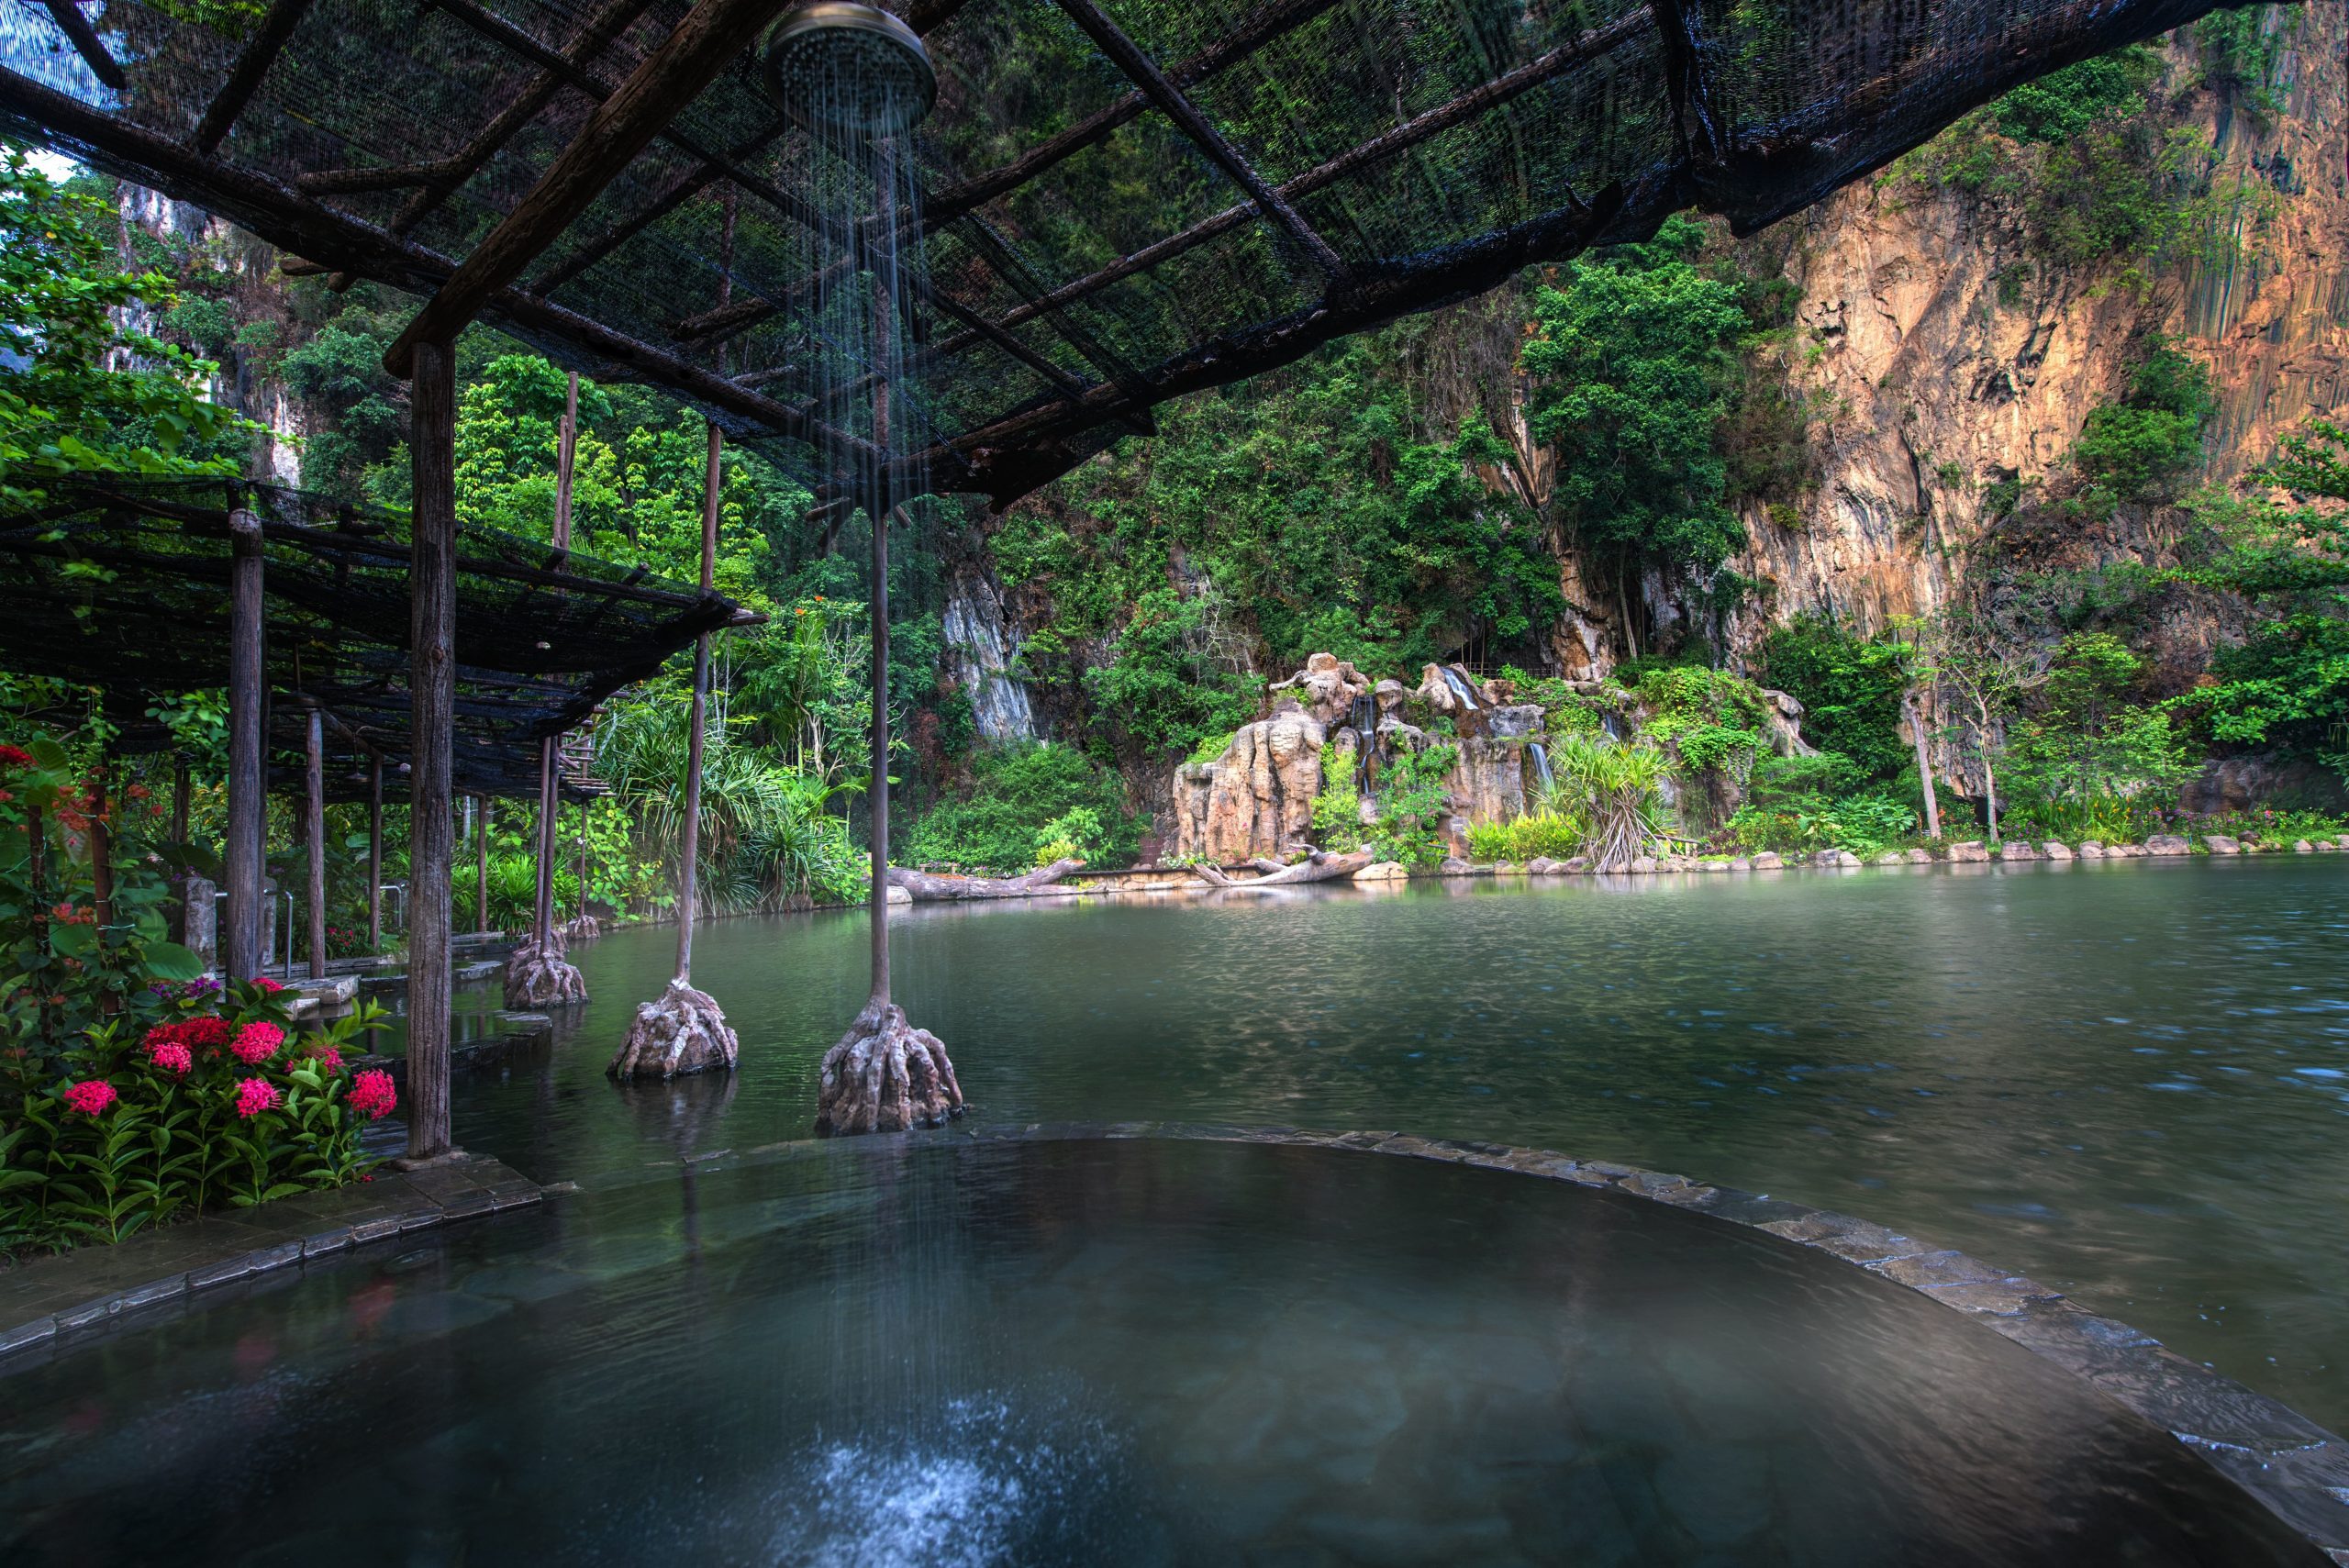 THE BANJARAN HOTSPRINGS RETREAT INVITES GUESTS TO ESCAPE AND EMBRACES